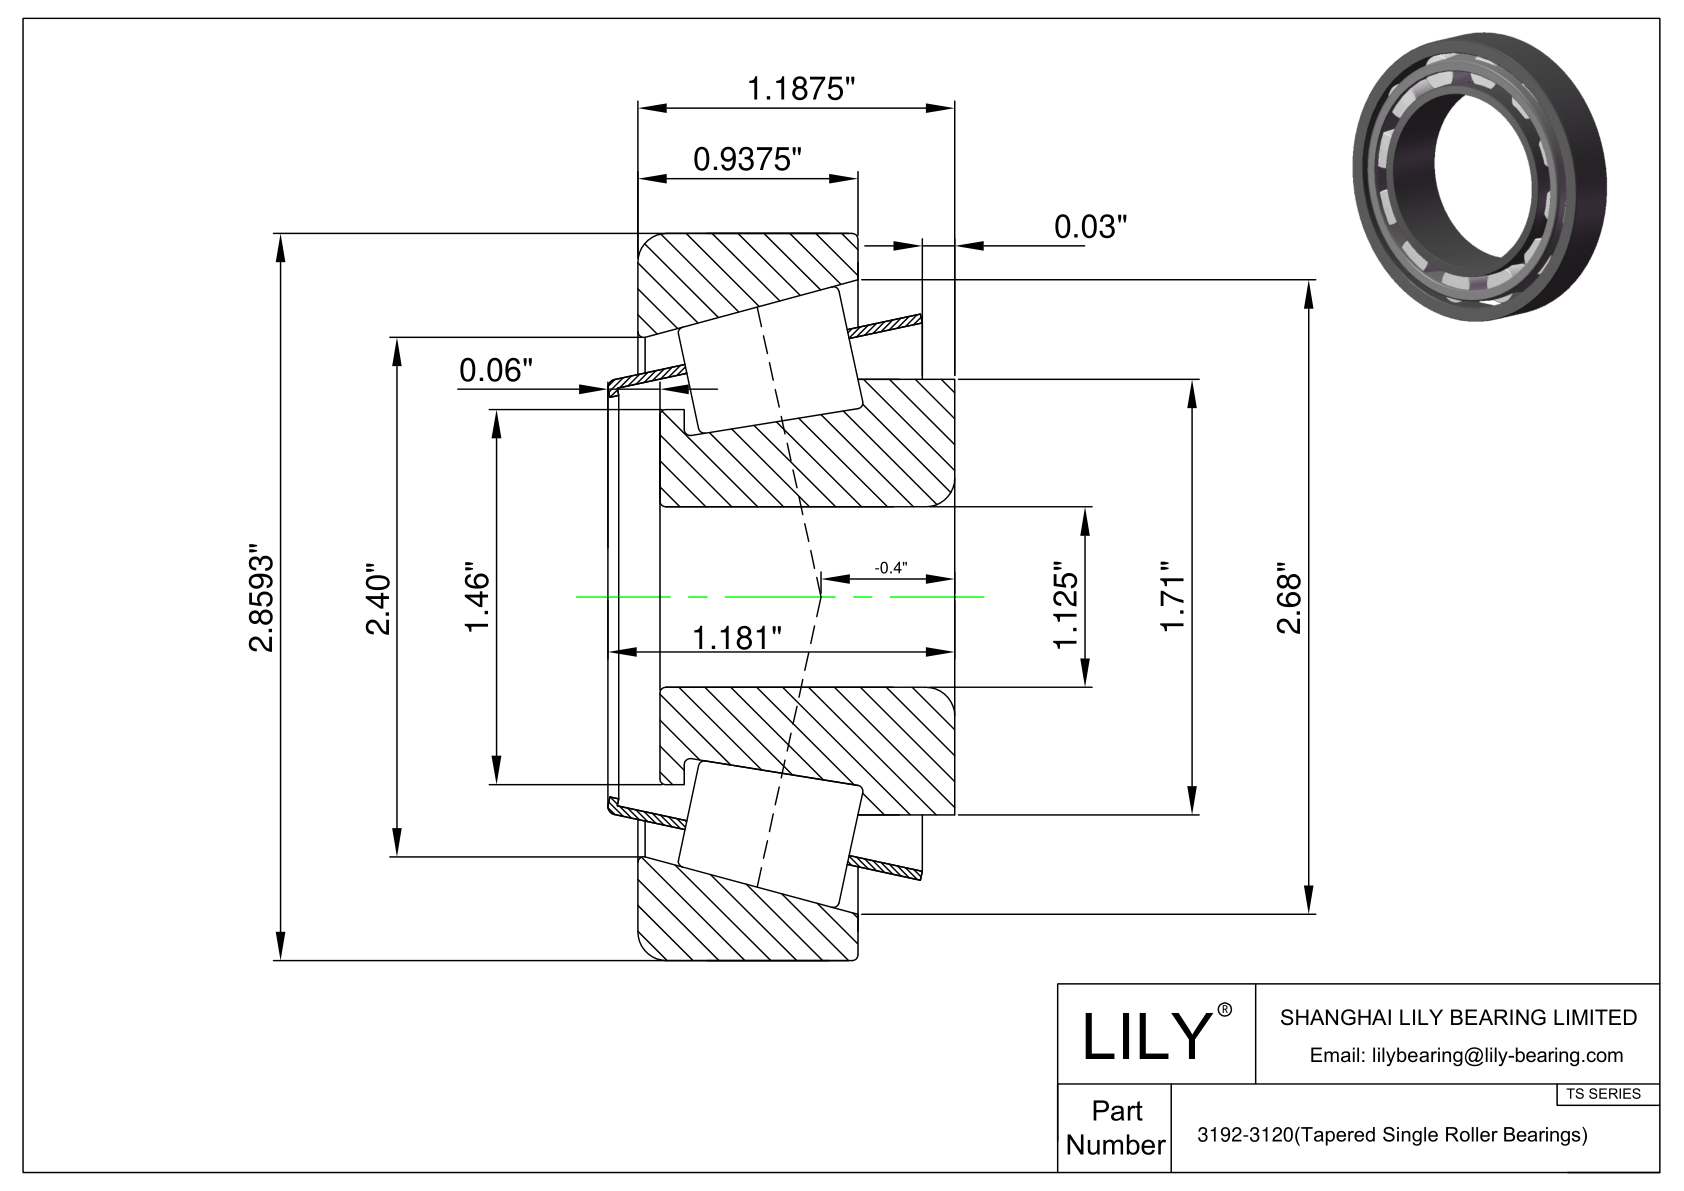 3192-3120 TS (Tapered Single Roller Bearings) (Imperial) cad drawing